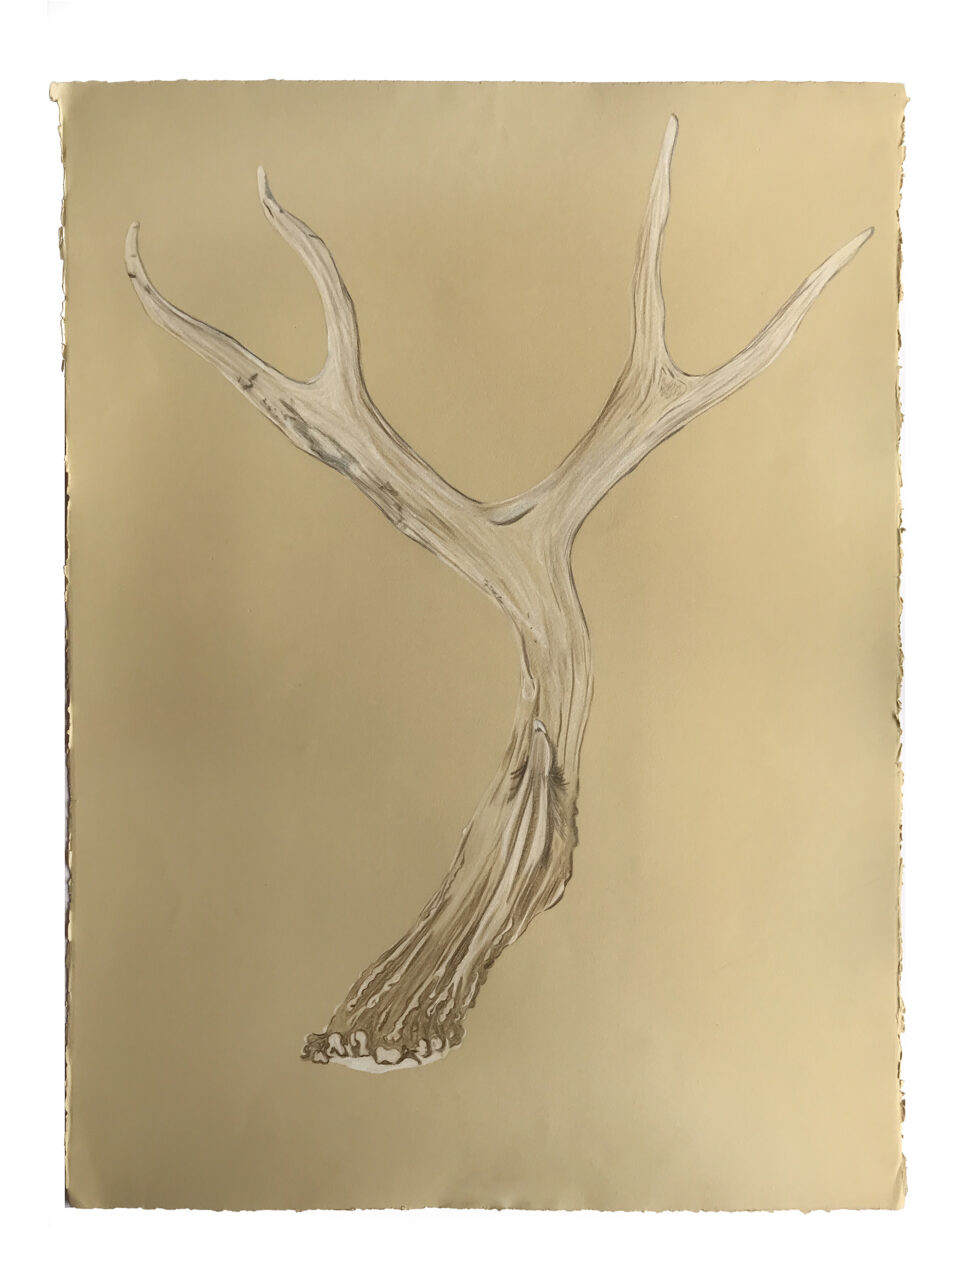 Drawing of an antler on a beige background.